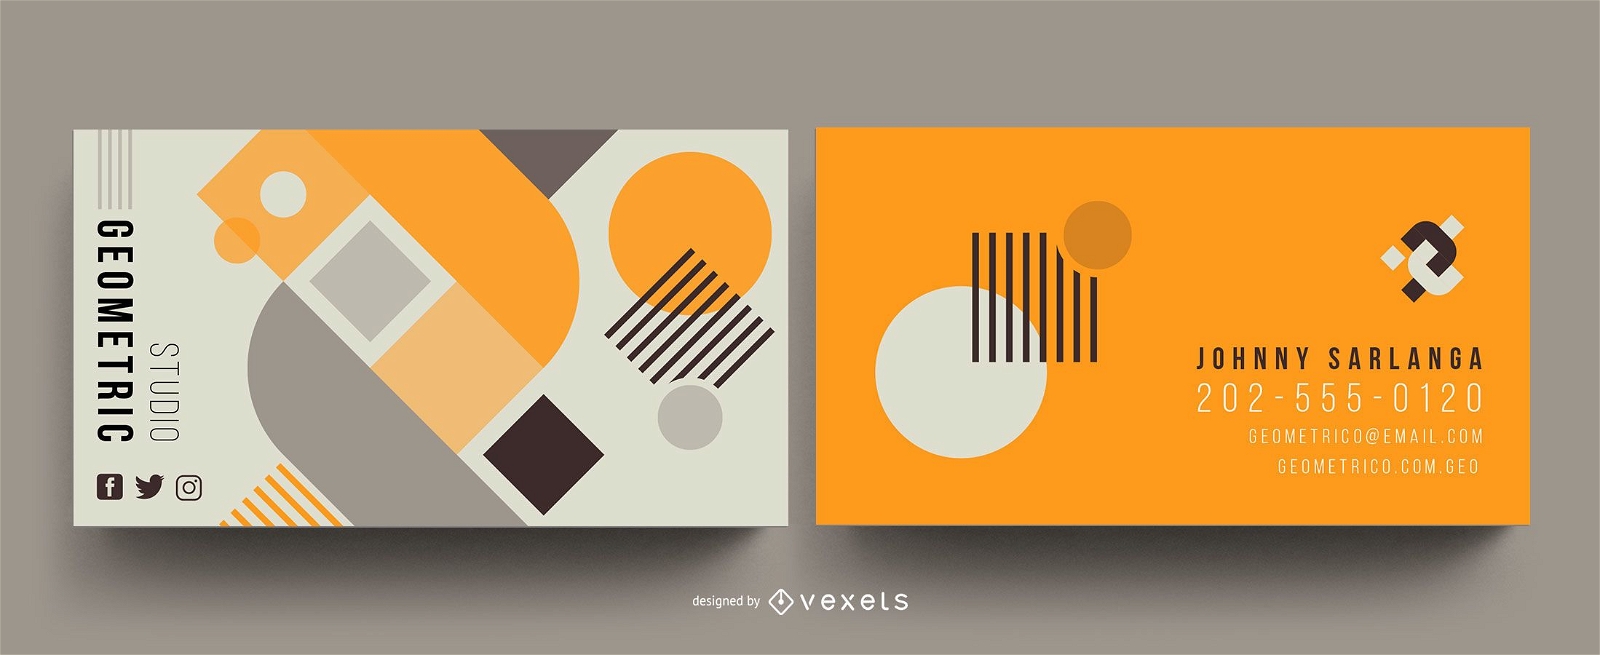 Geometric abstract business card template